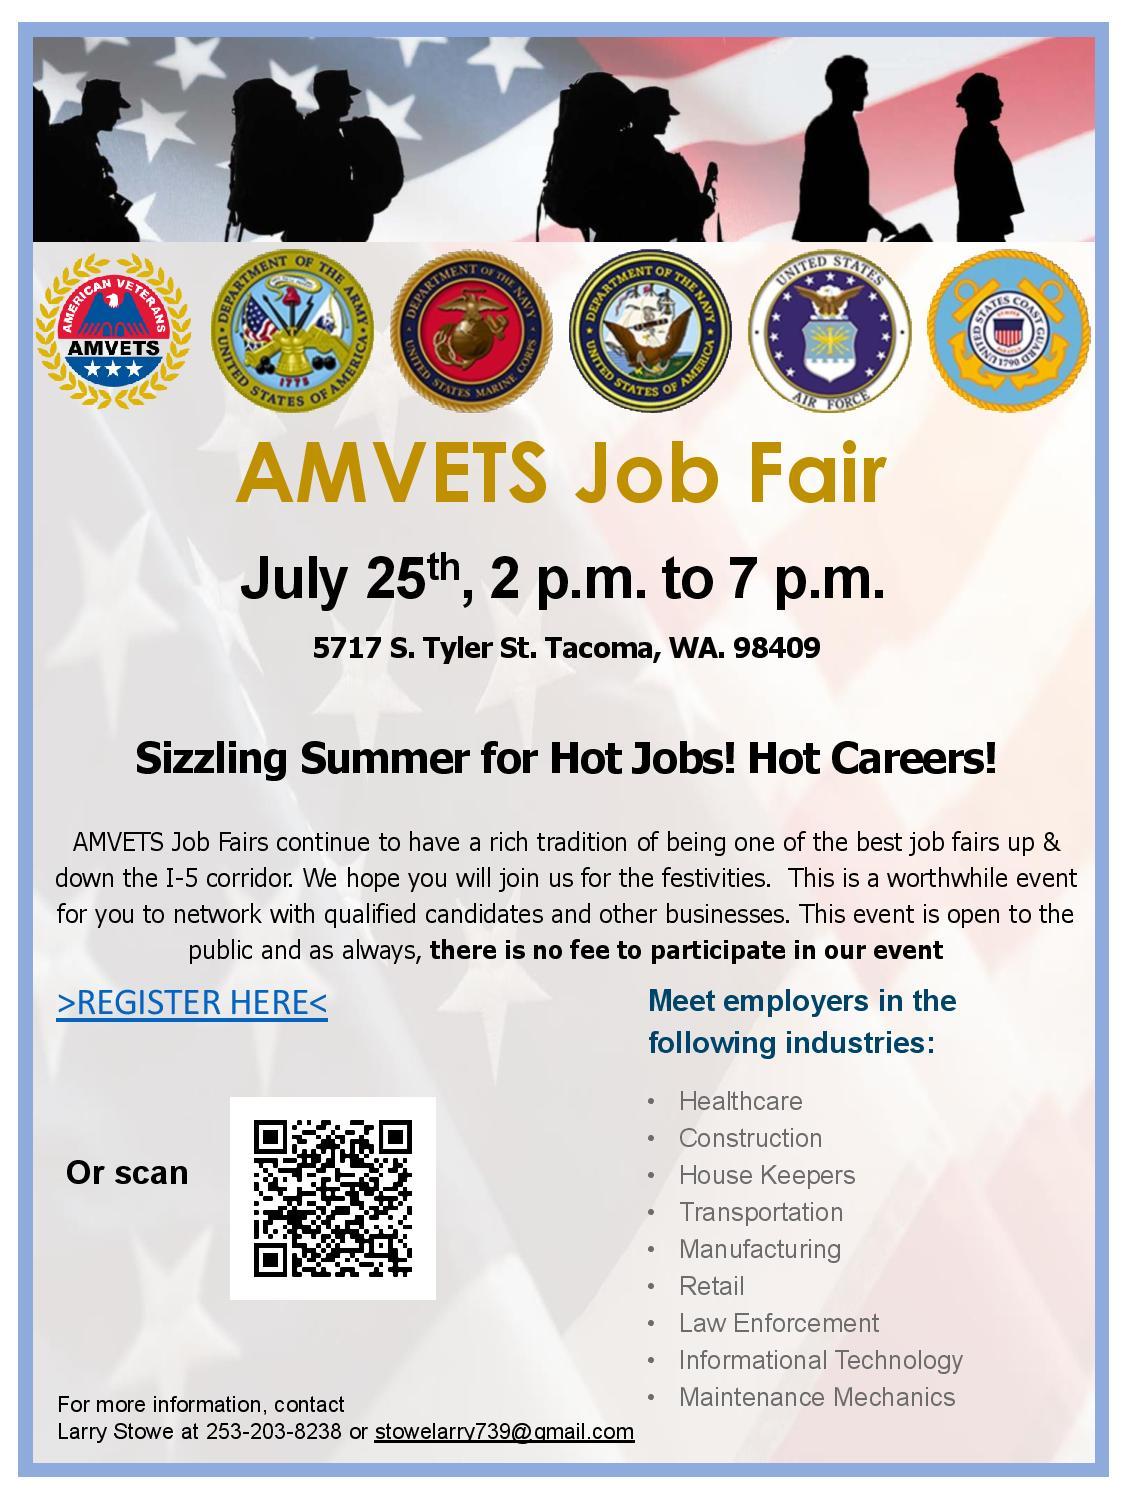 AMVETS event flyer